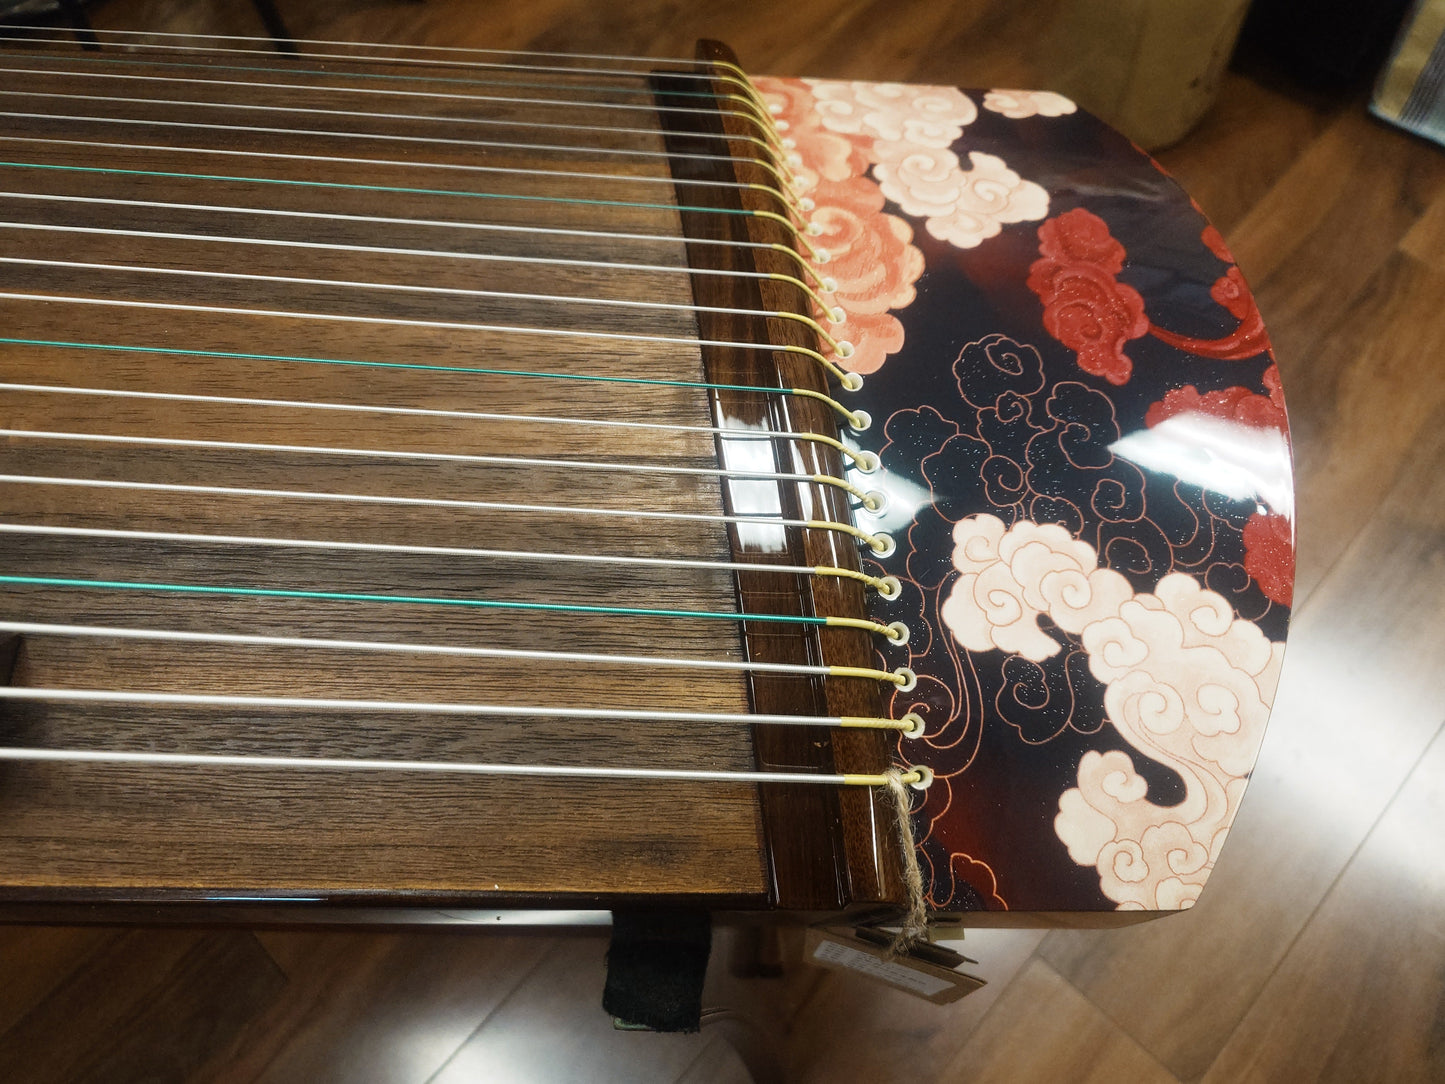 53" Tangxiang Concert South American Rosewood Guzheng "Soothing Cloud"